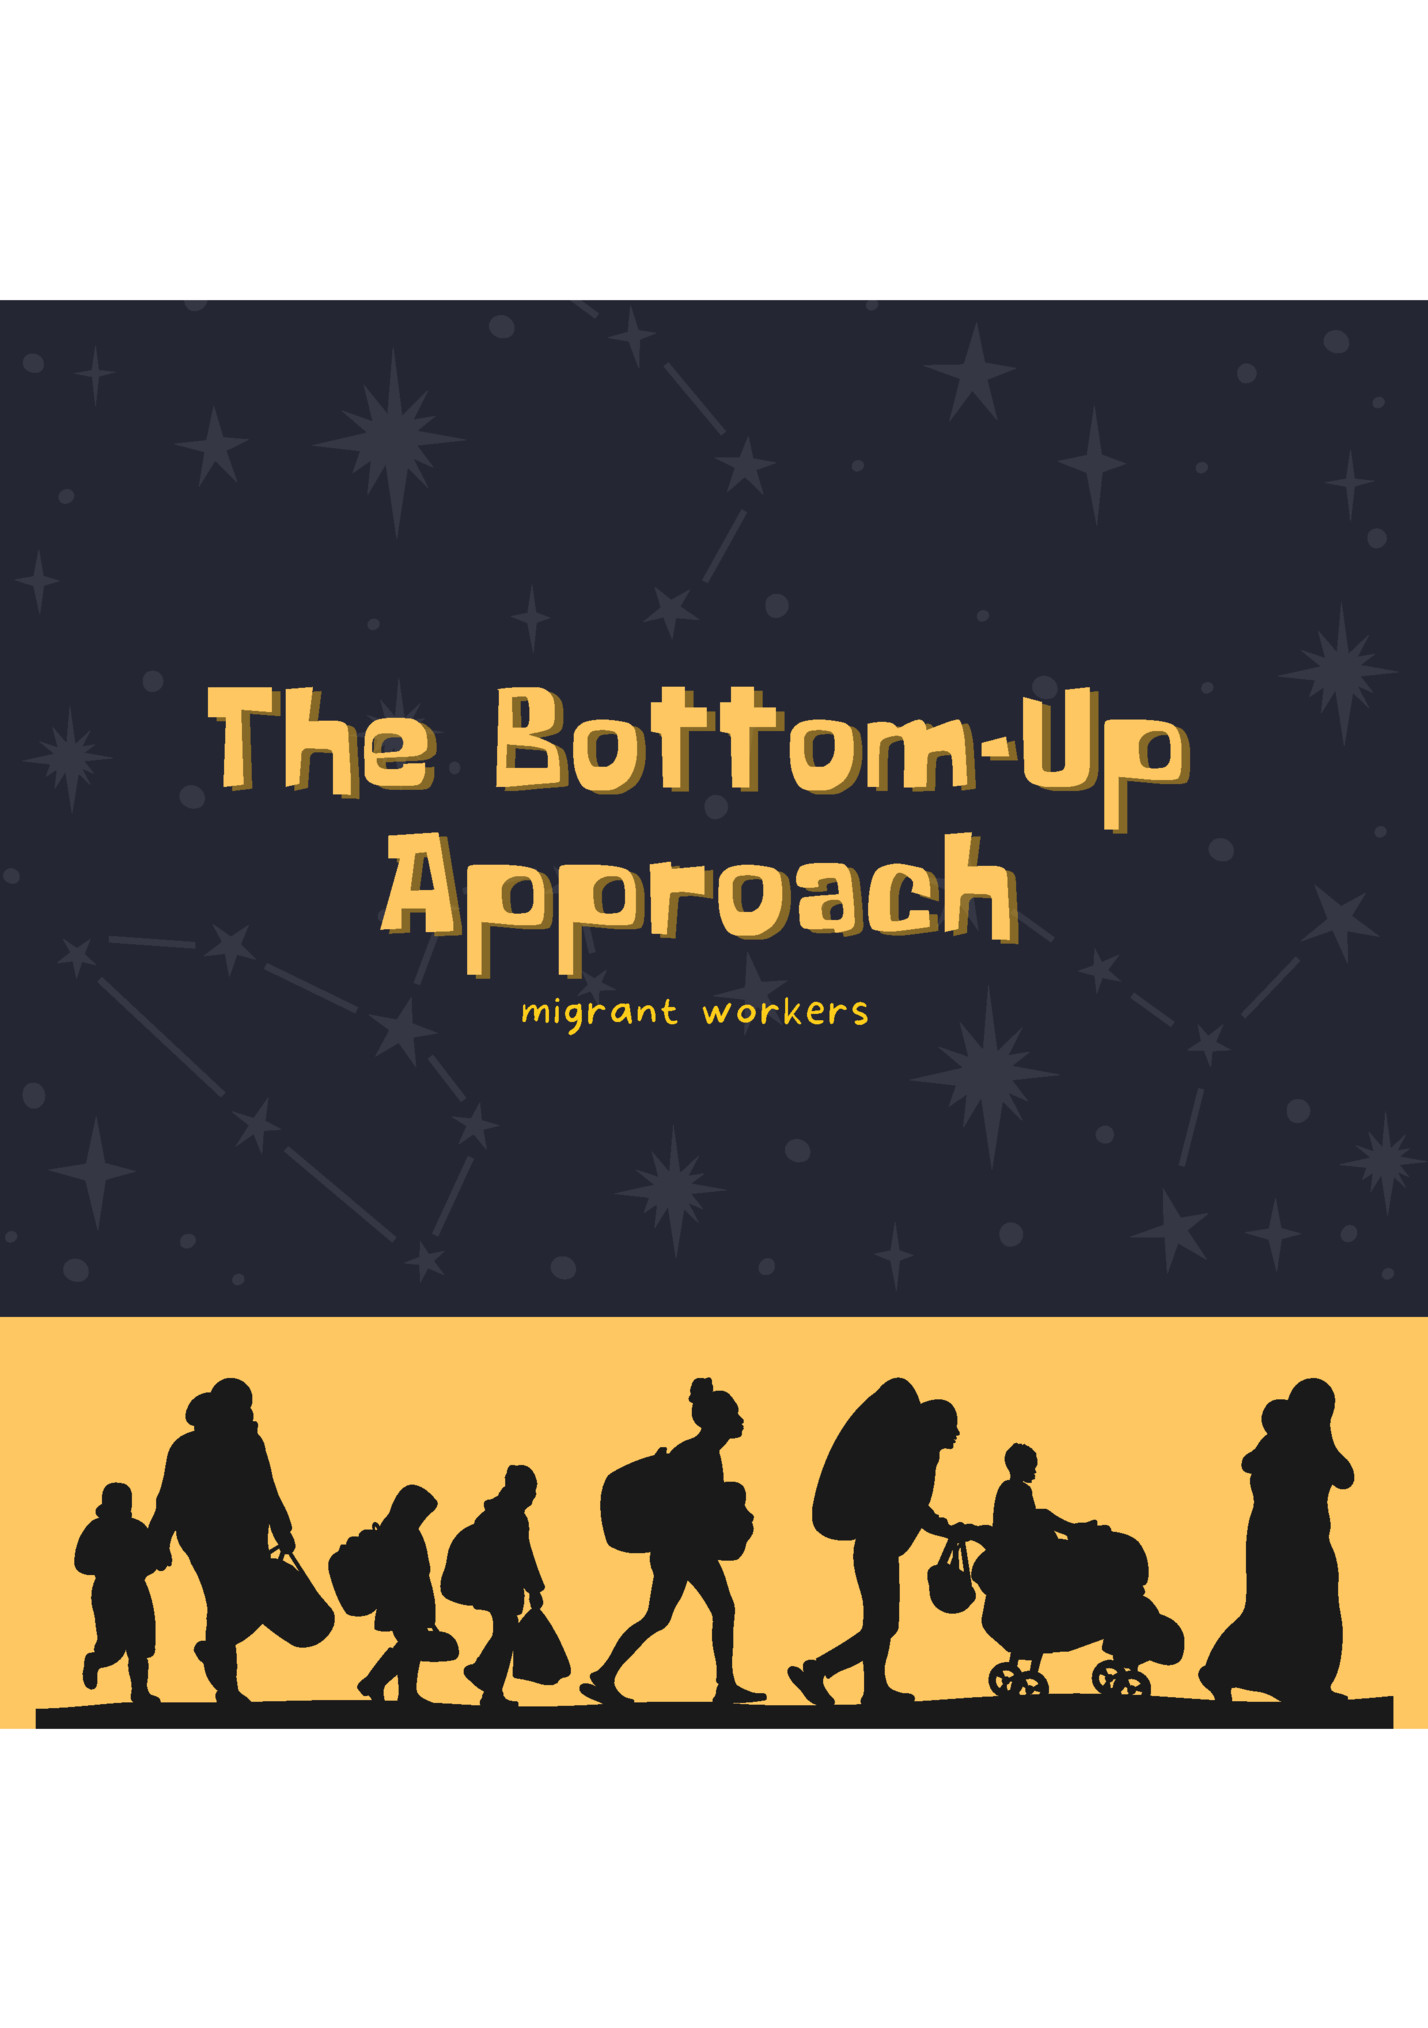 The Bottom-Up